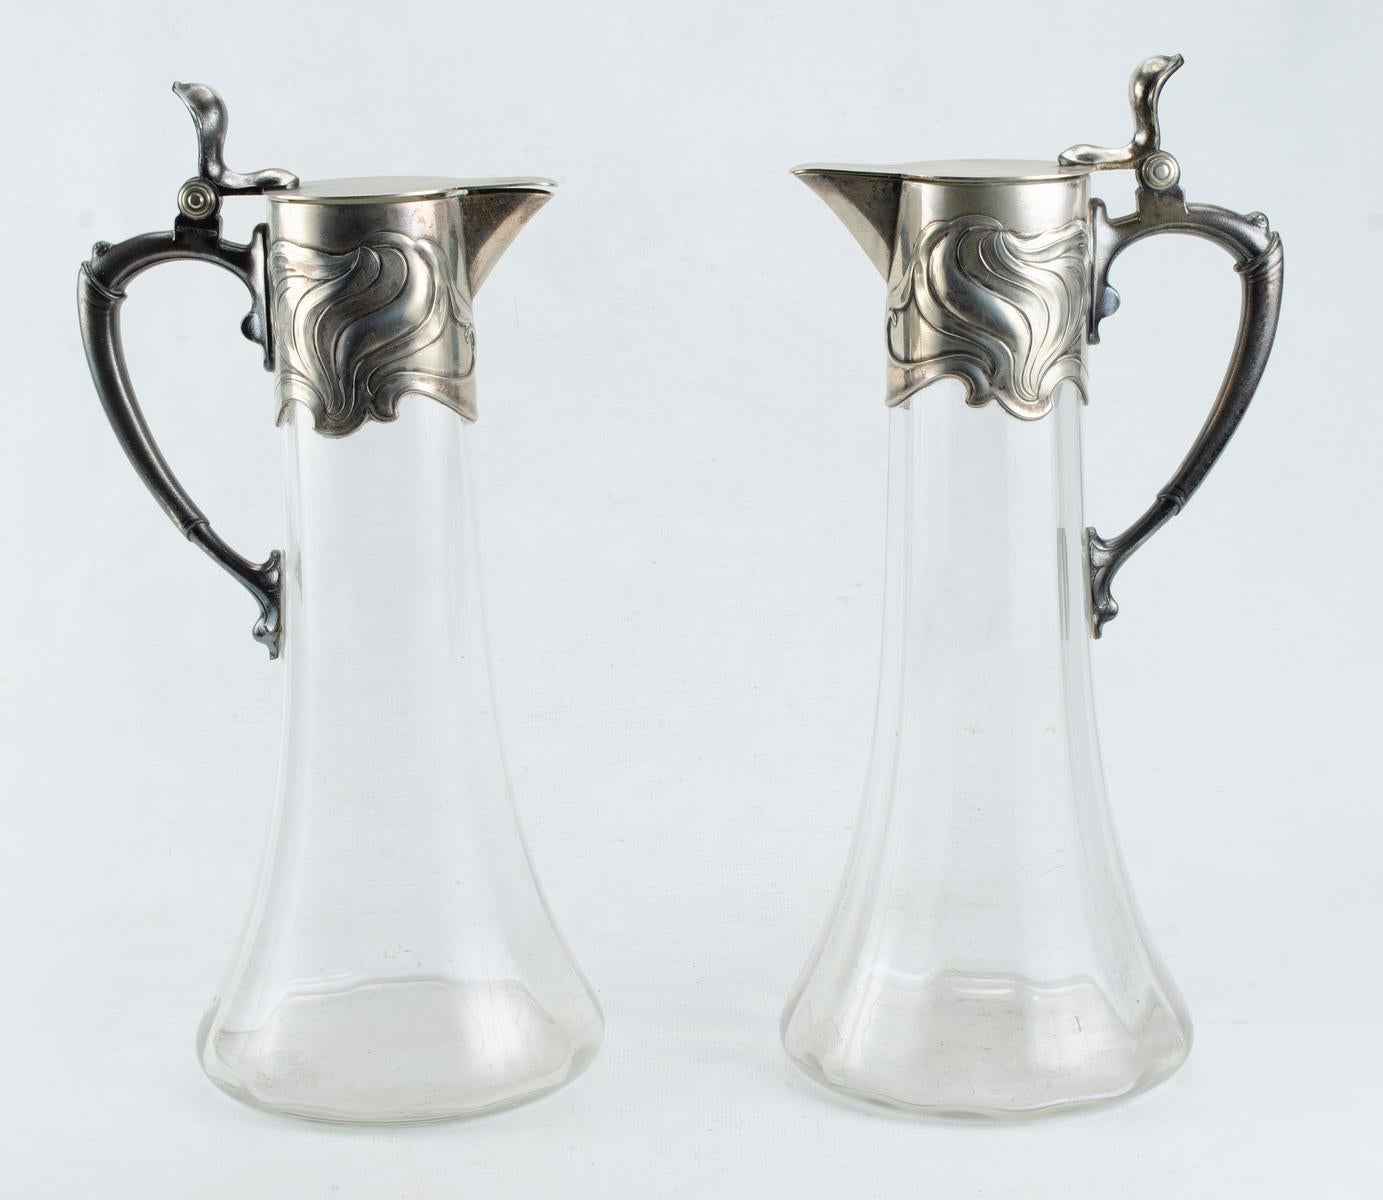 Pair of Art nouveau wine jugs.
W.M.F fabric.
Circa 1900 Origin Germany.
Material: Glass and silver metal.
Perfect condition natural wear.
Sealed W.M.F
Art nouveau, modernist art or modernism was an international artistic and decorative movement,